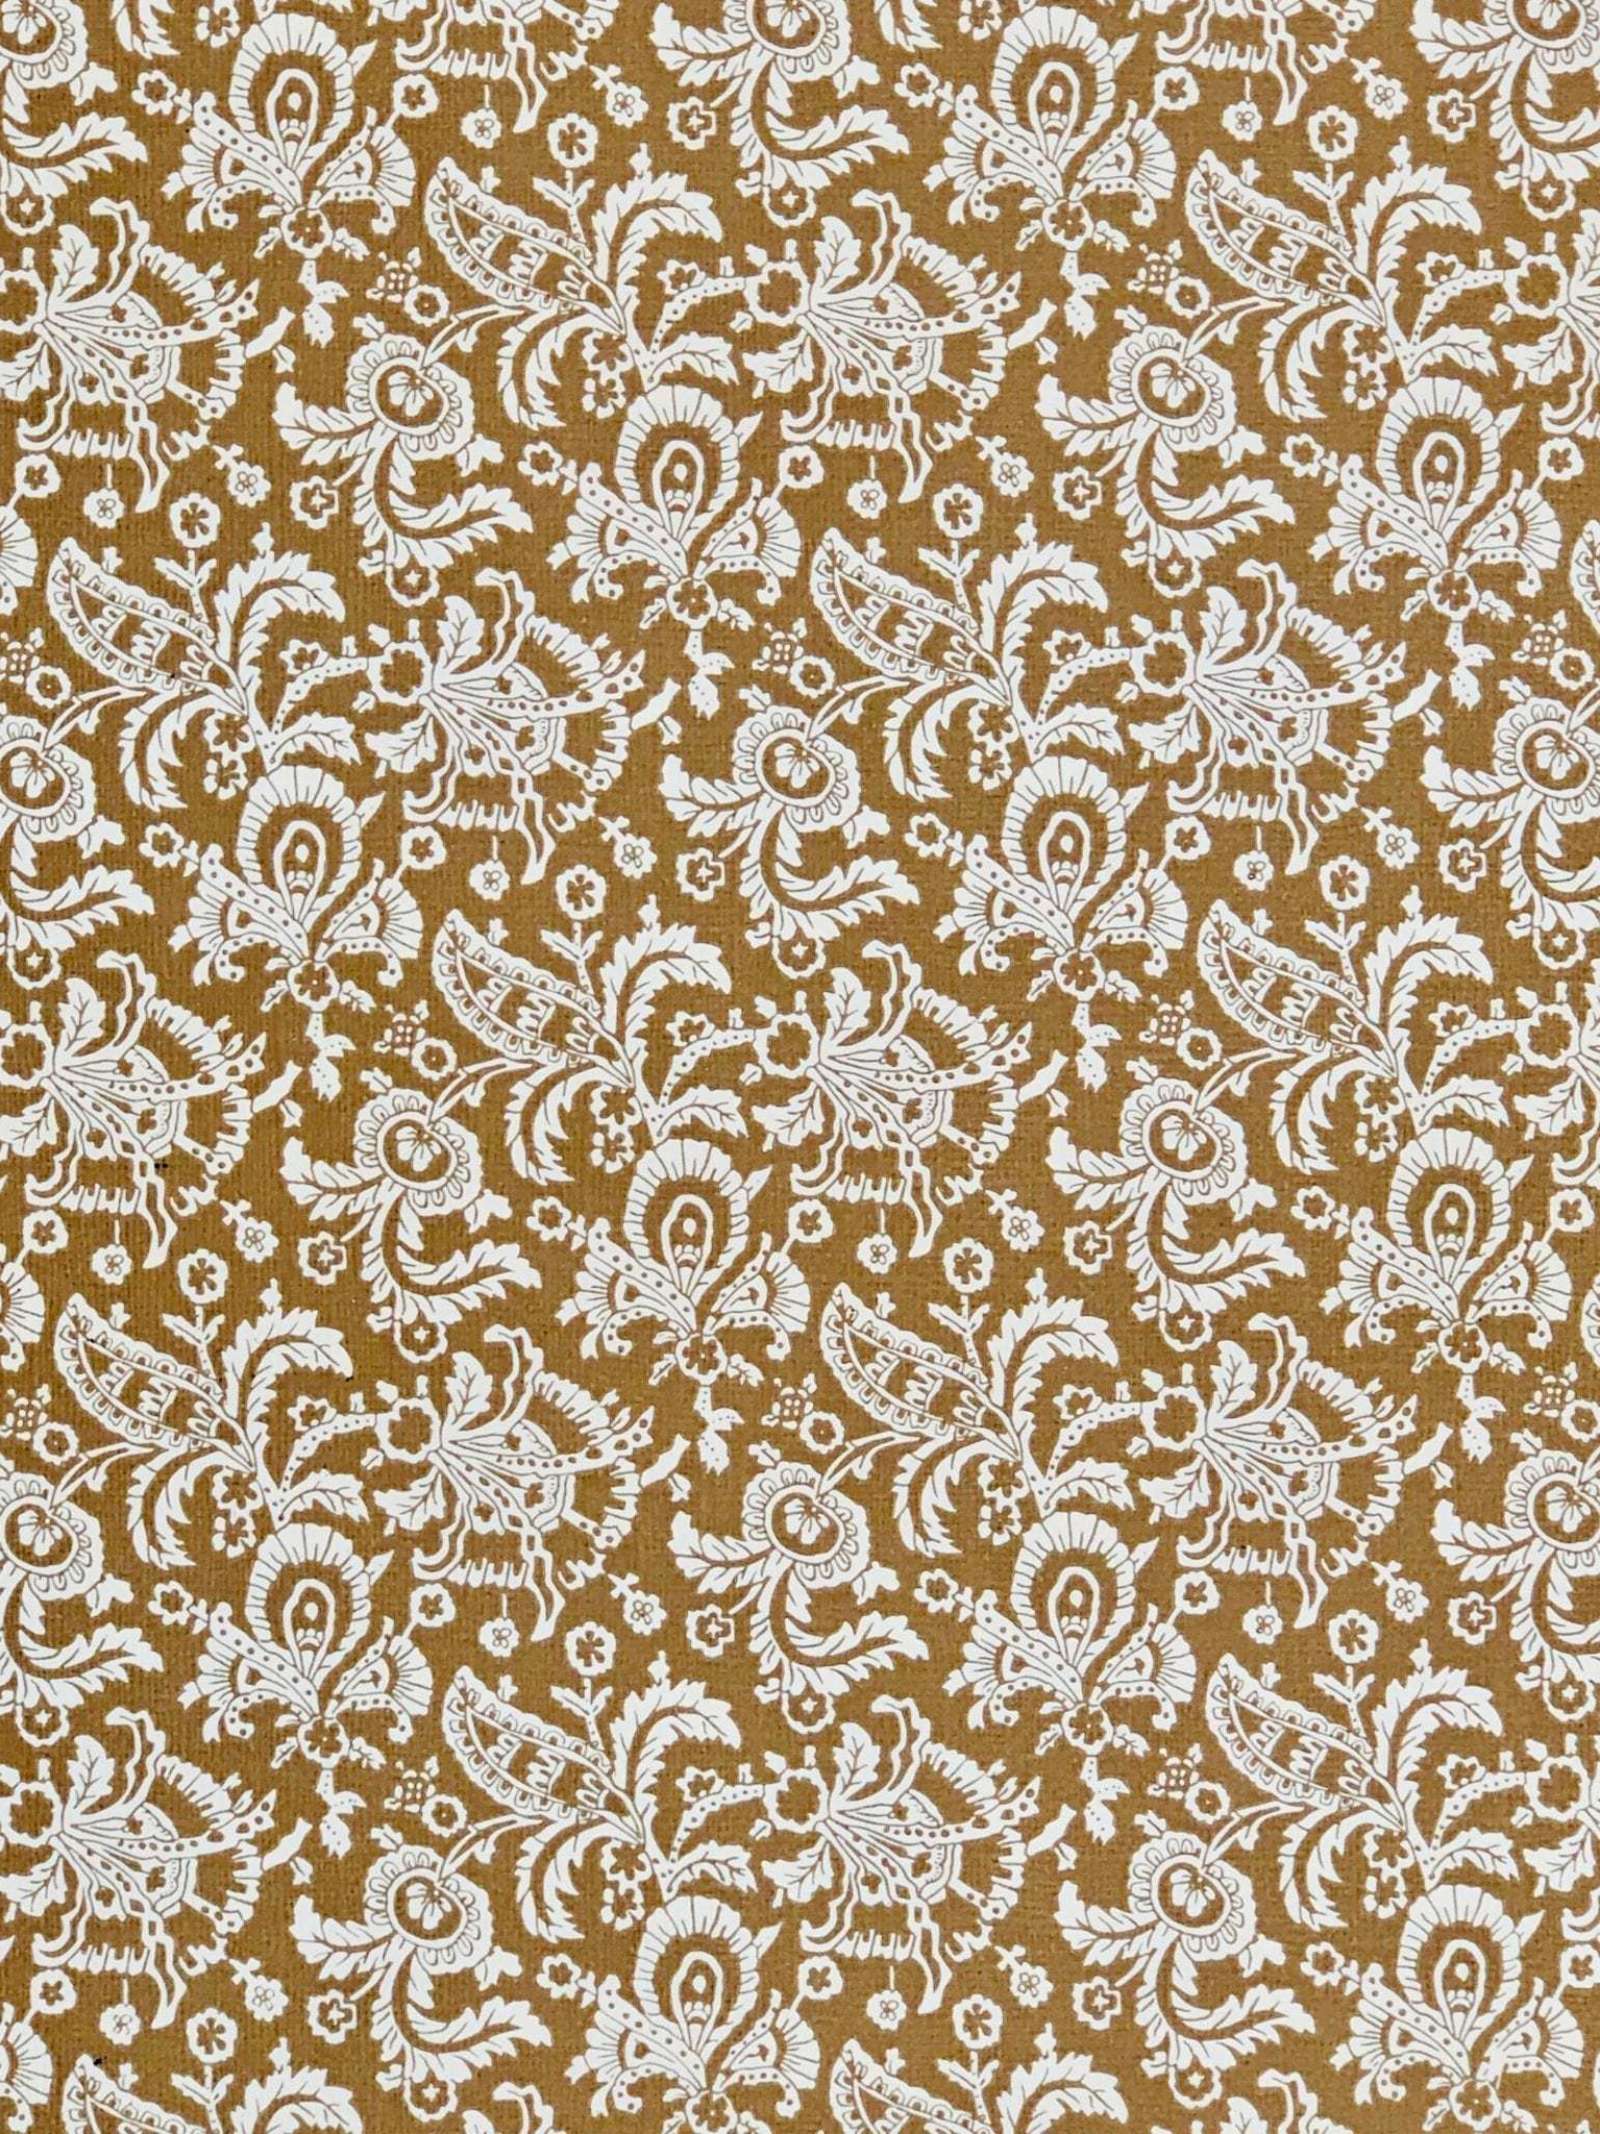 Buy Beige 3D Paisley Design Peel And Stick Self Adhesive Wallpaper by  100yellow Online - 3D Wallpapers - Wallpapers - Furnishings - Pepperfry  Product